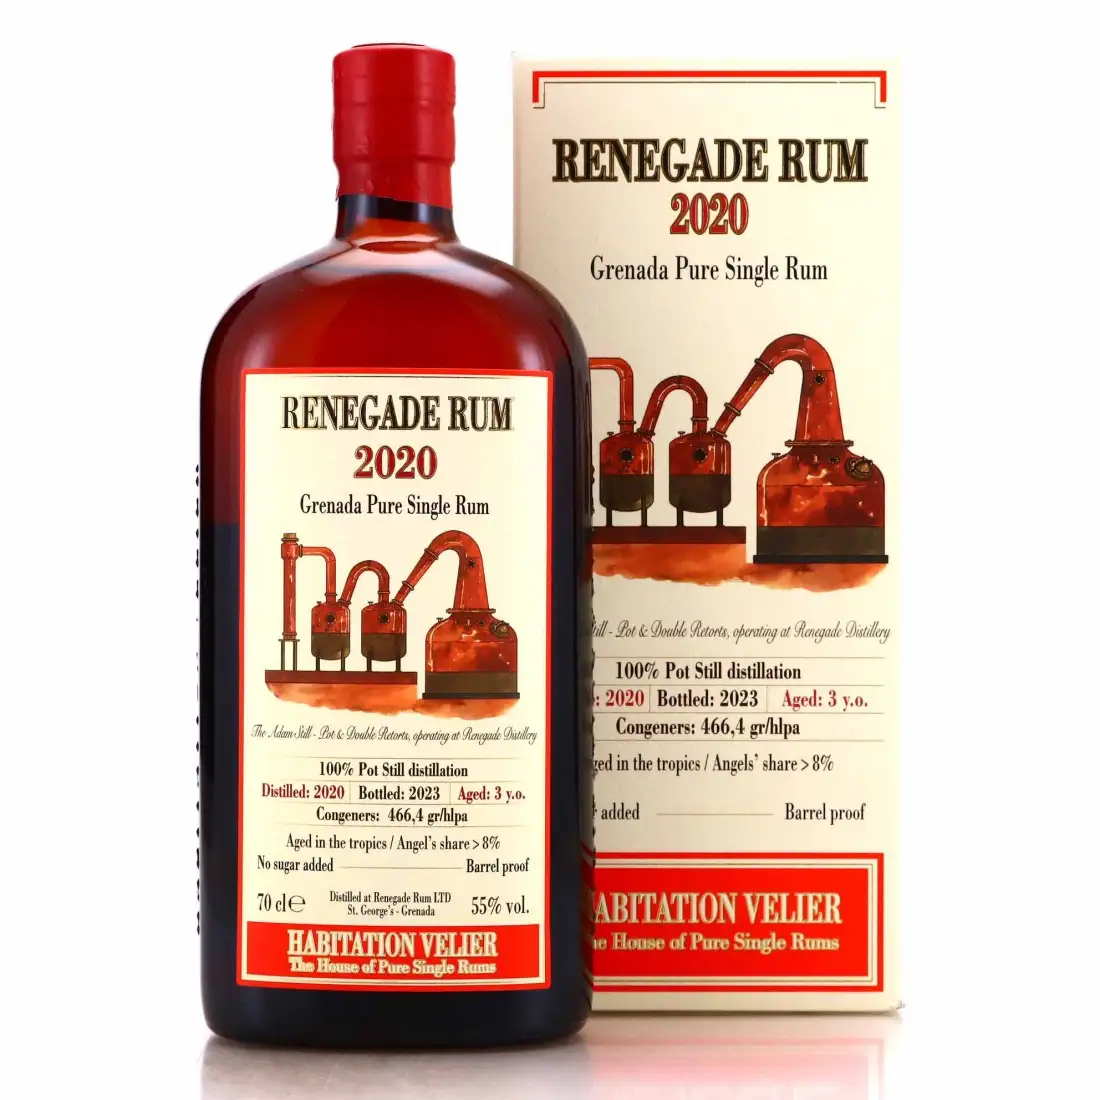 Image of the front of the bottle of the rum Renegade